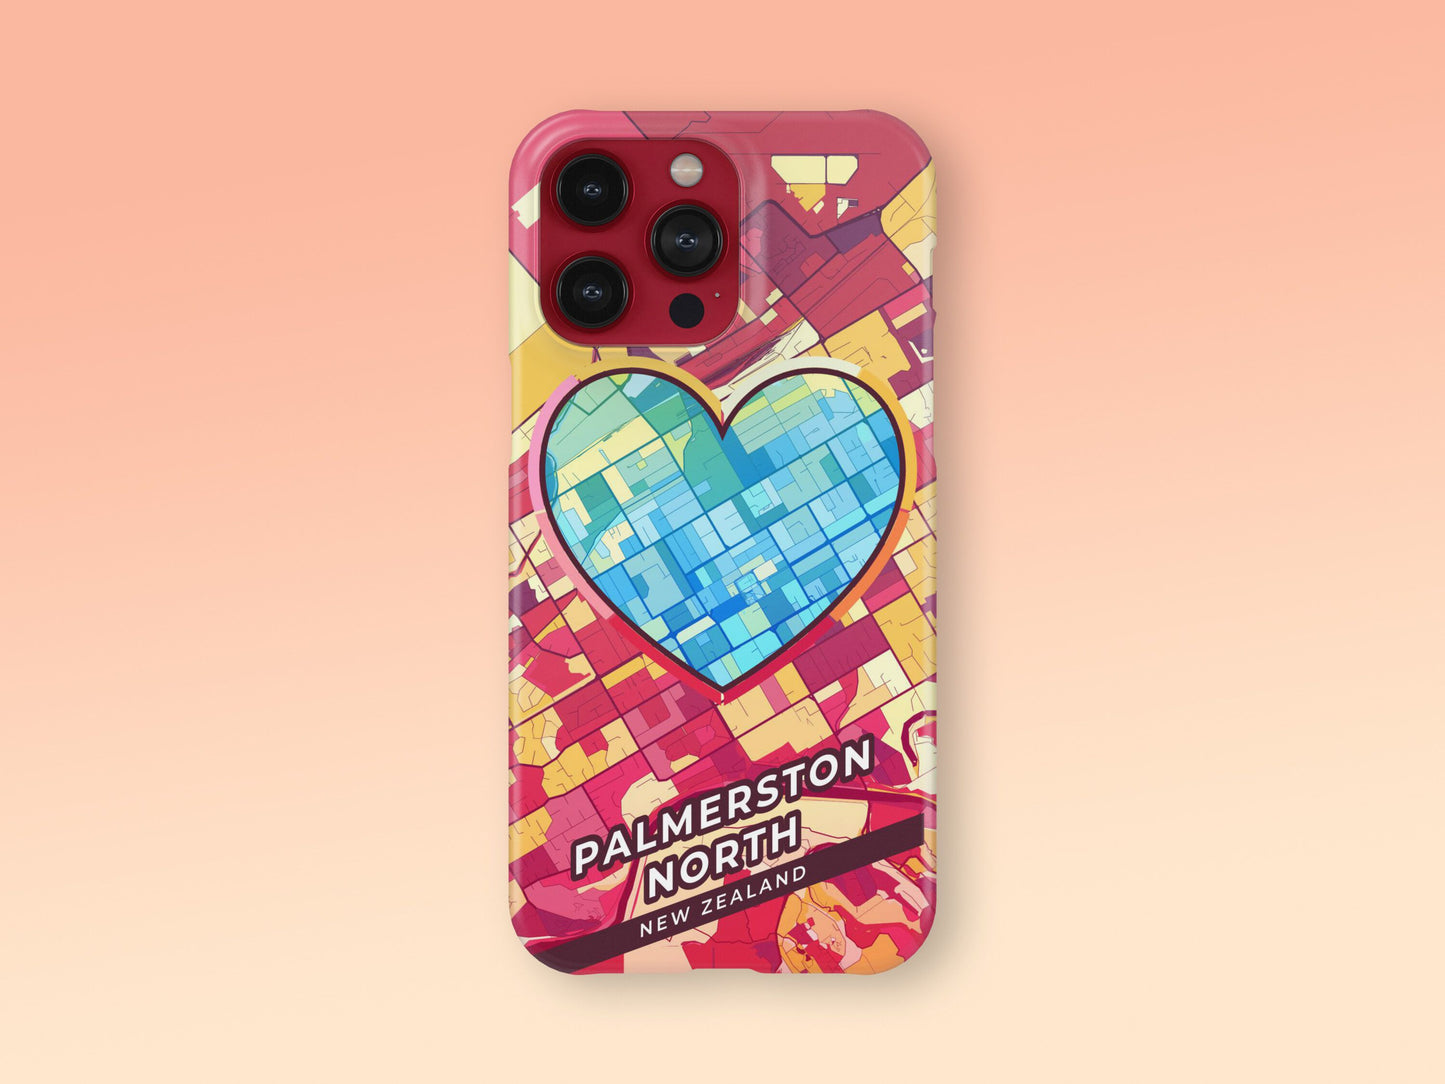 Palmerston North New Zealand slim phone case with colorful icon 2